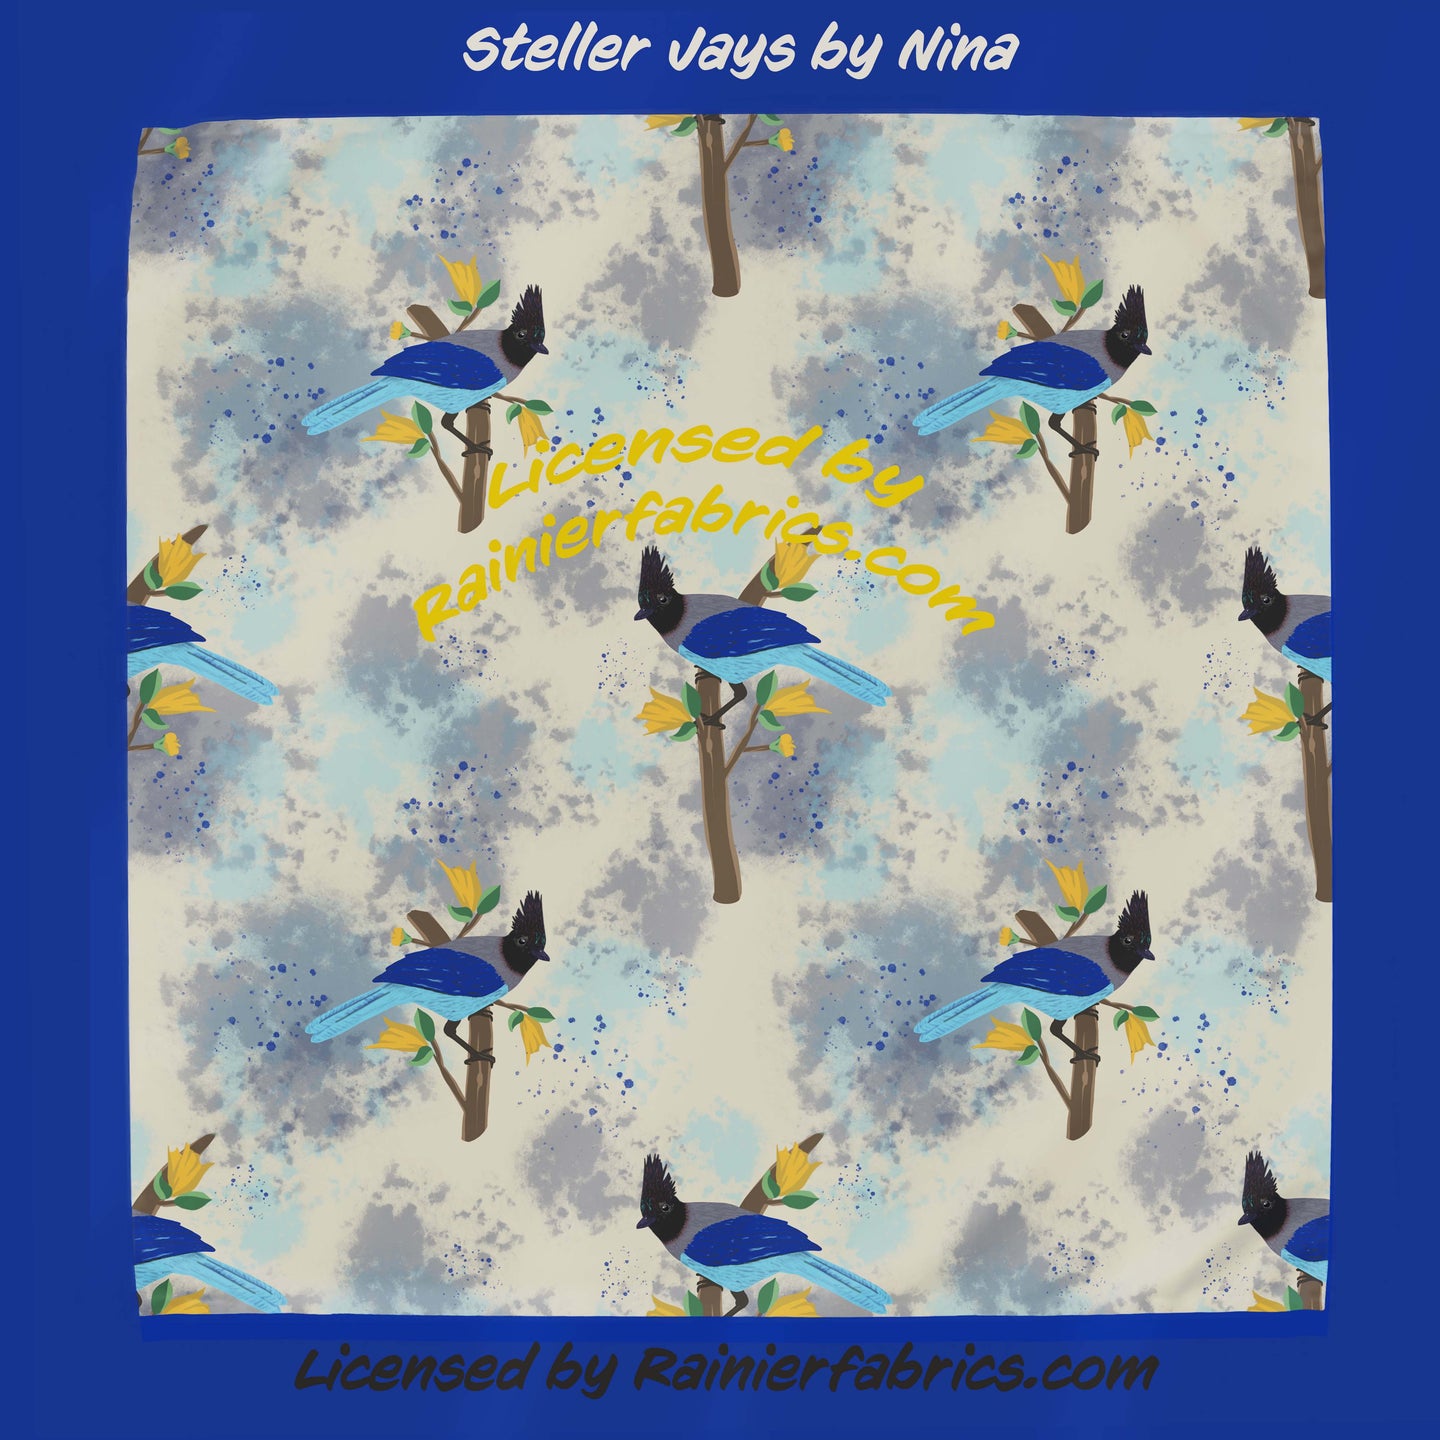 Steller Jays by Nina - Rainier Fabrics Exclusive!!! - 3-5 day TAT - Order by 1/2 yard; Blankets and towels available too